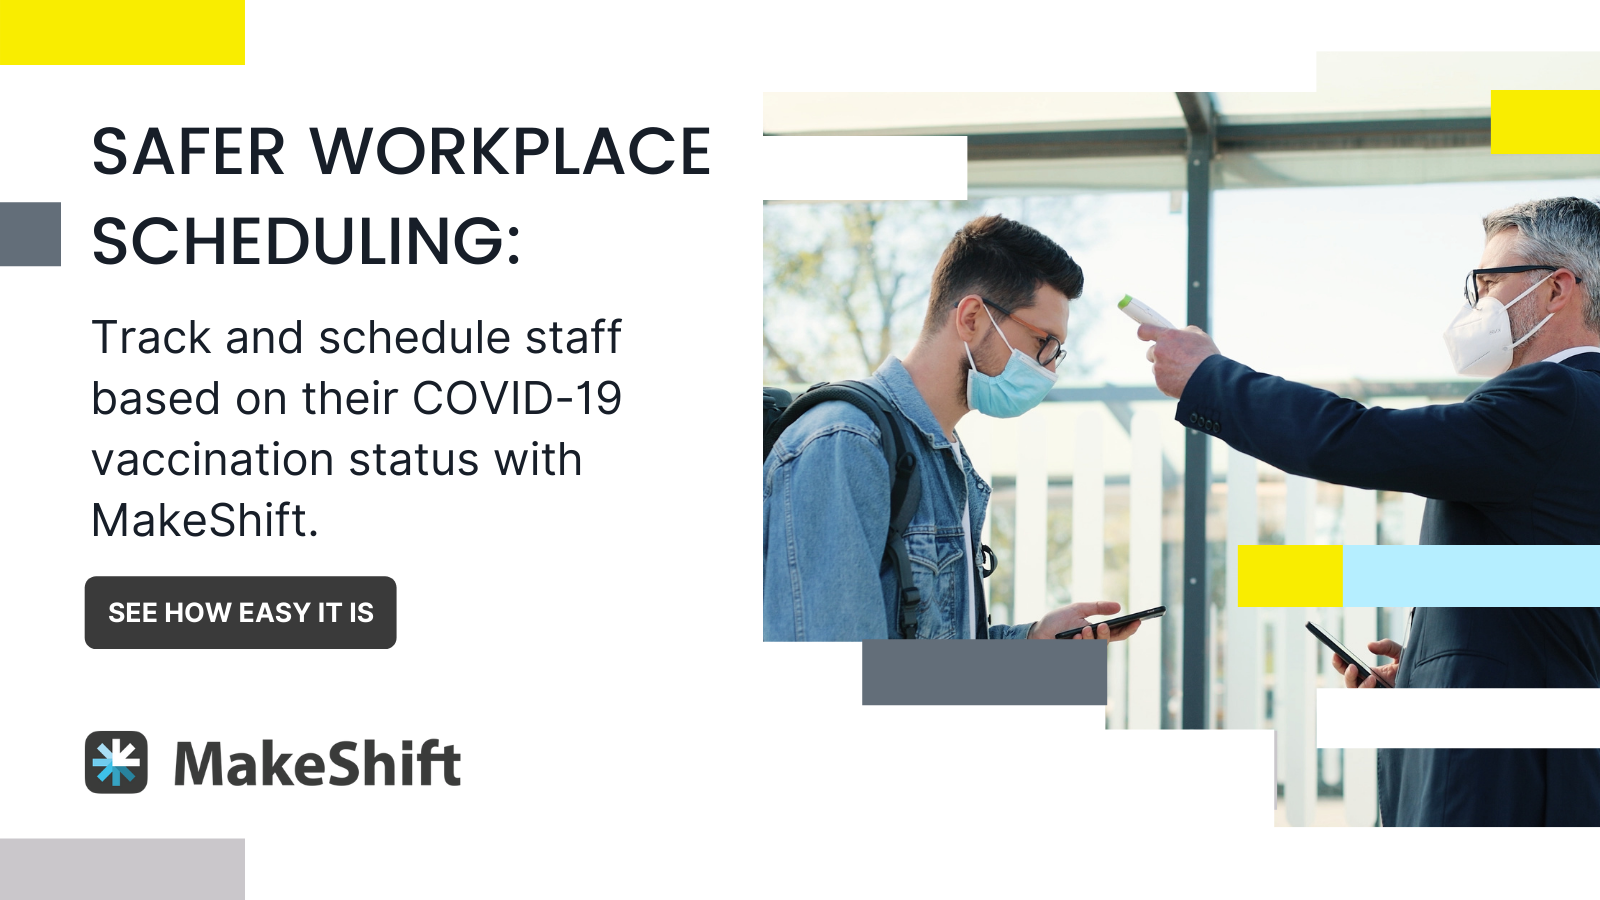 Safer Workplace Scheduling with MakeShift's COVID-19 Vaccine Status Tracking Feature